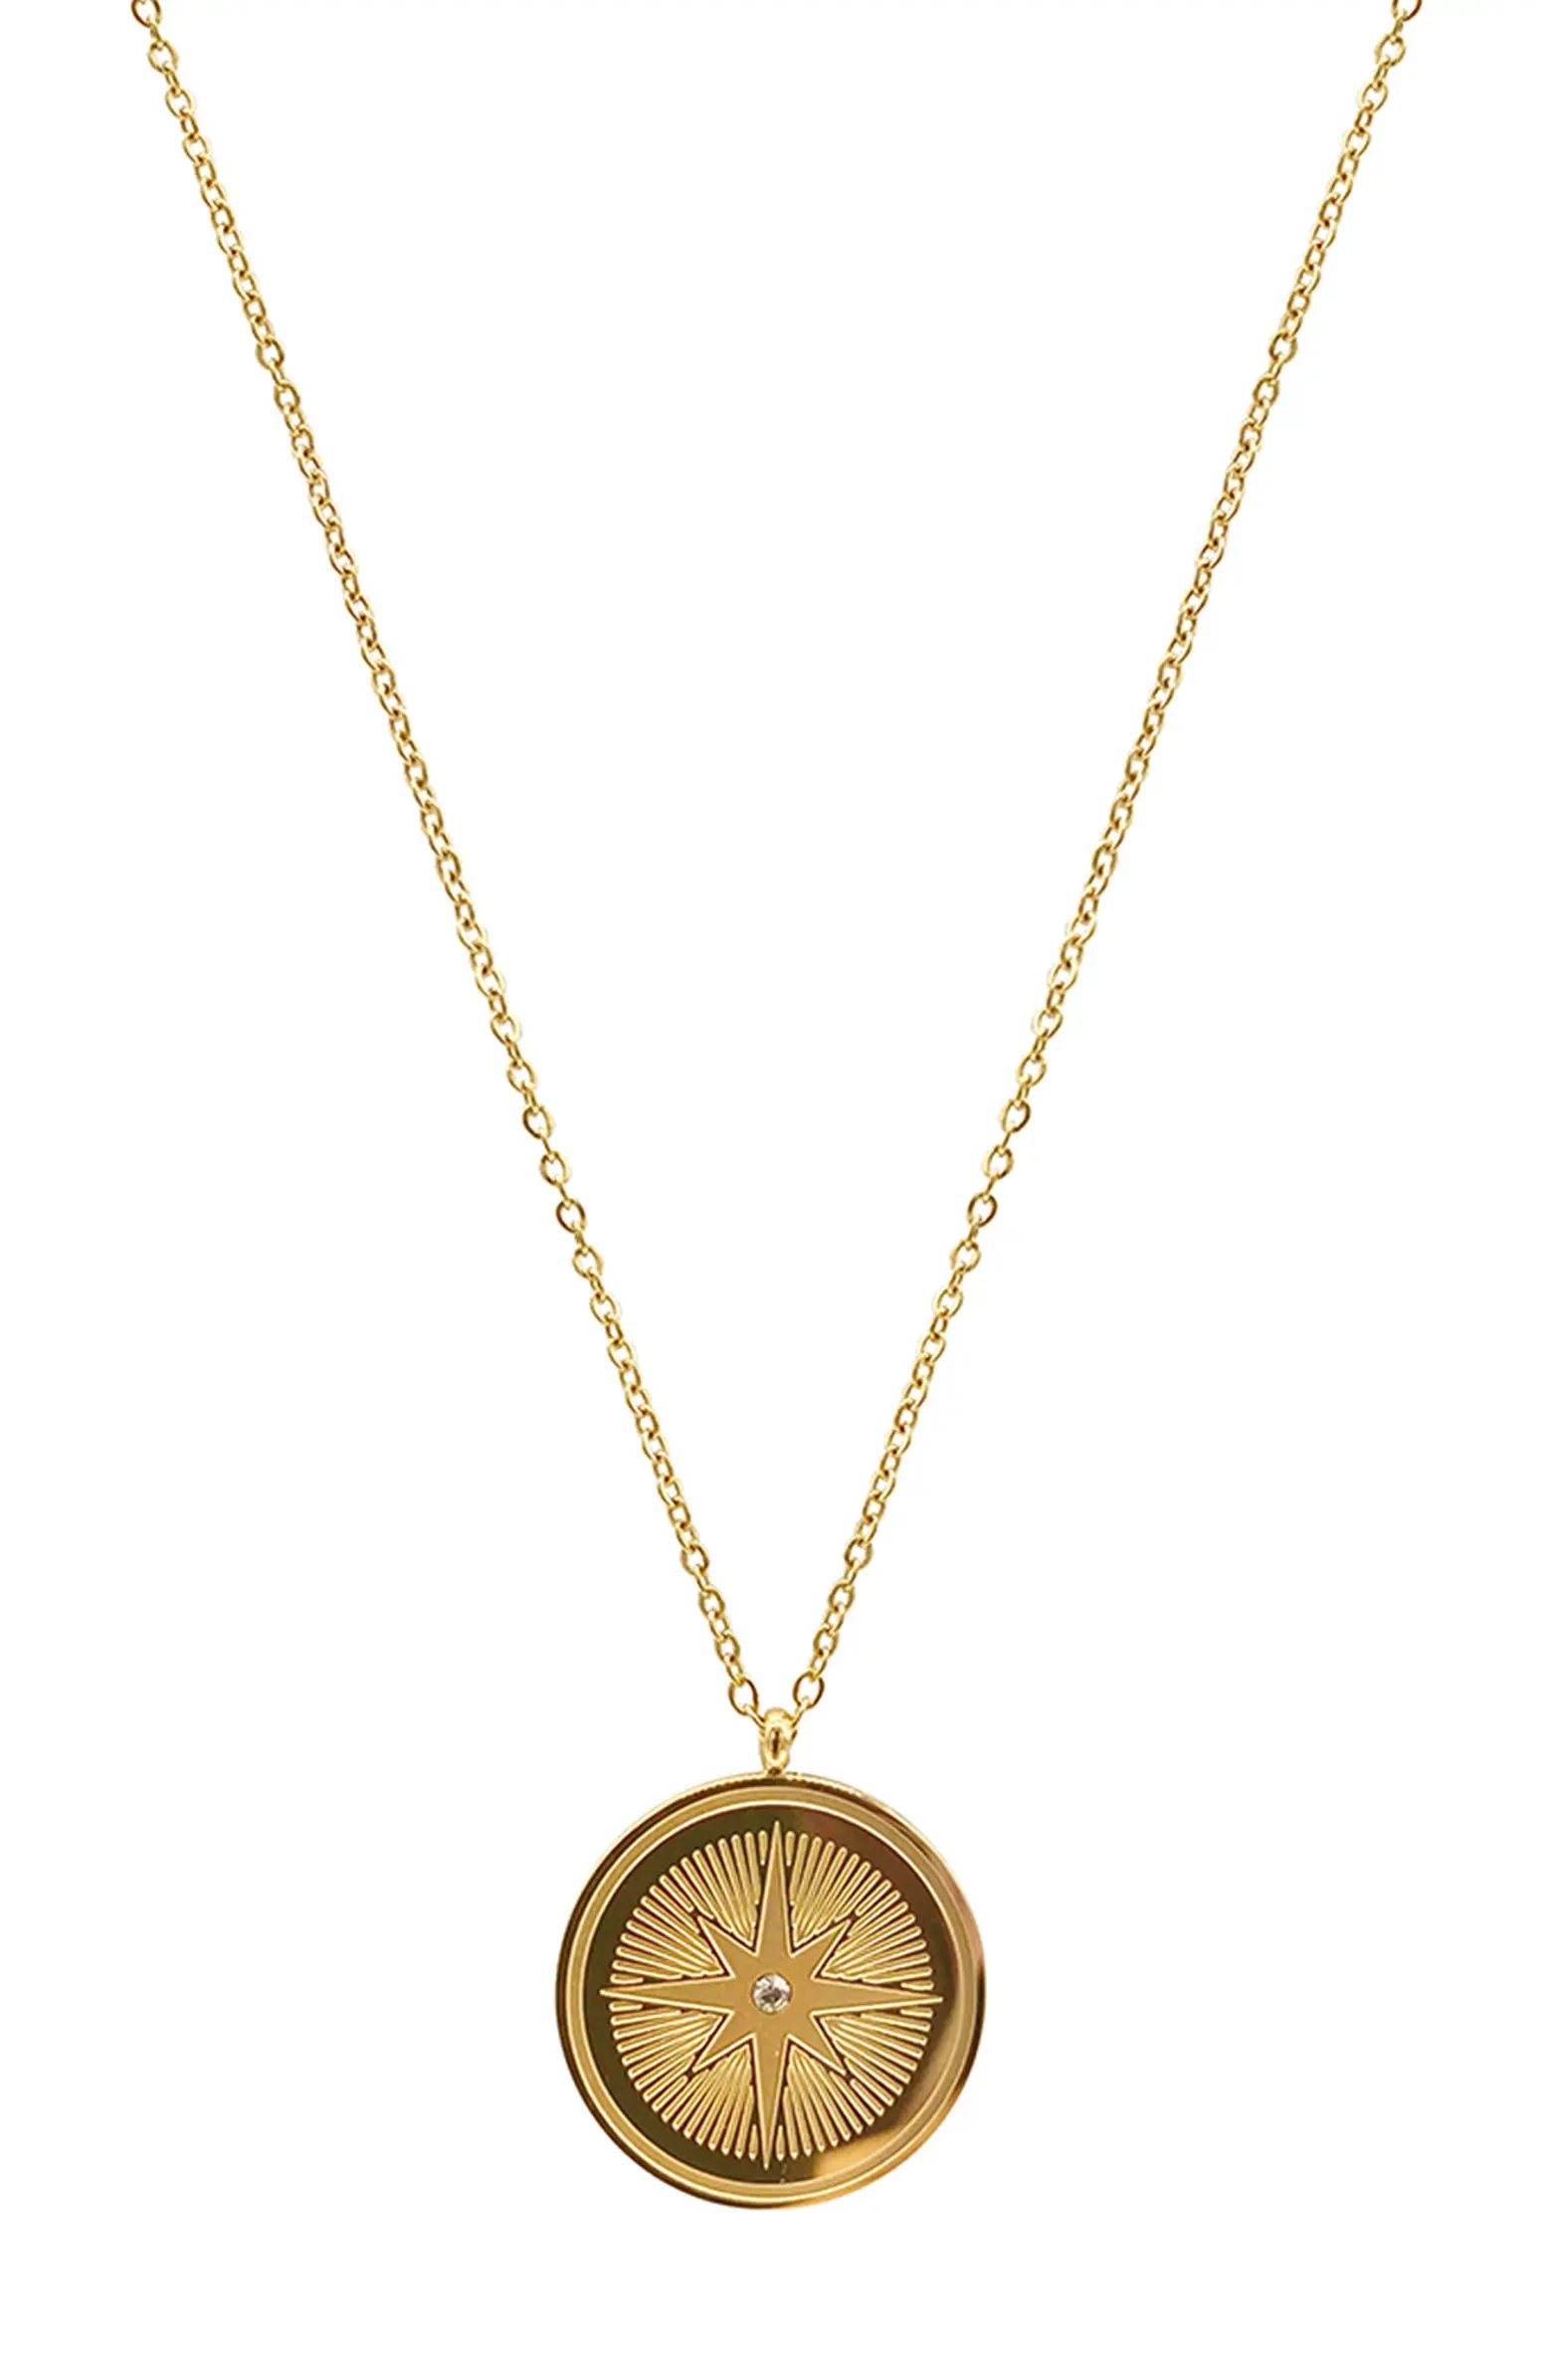 Adornia 14K Gold Plated Water Resistant Star Compass Necklace | Nordstromrack | Nordstrom Rack